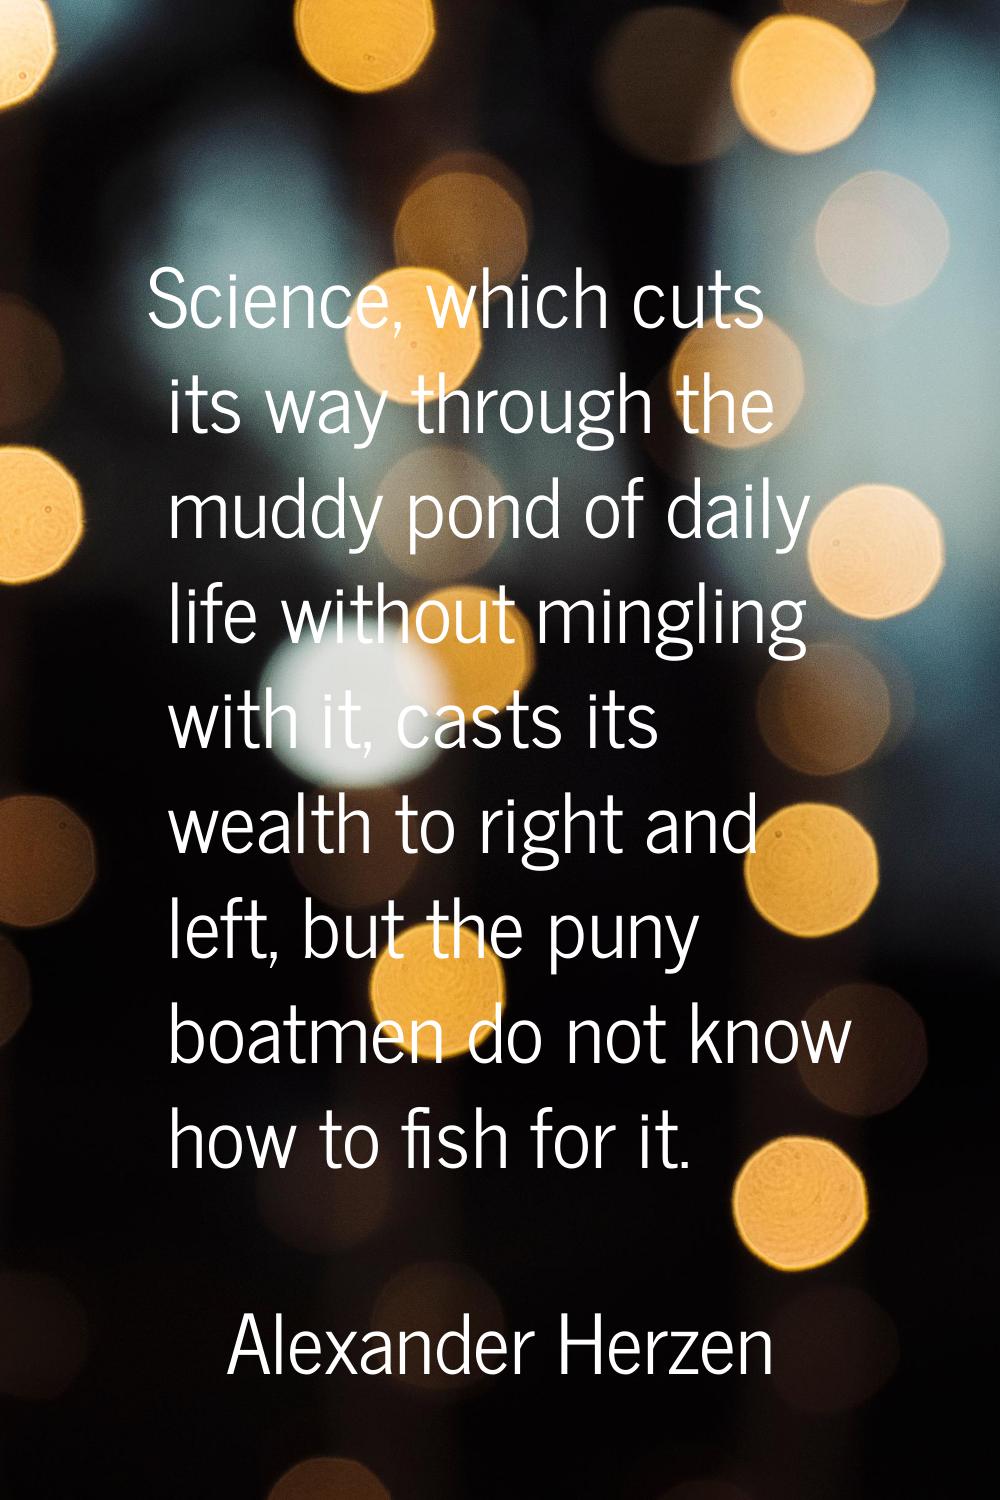 Science, which cuts its way through the muddy pond of daily life without mingling with it, casts it